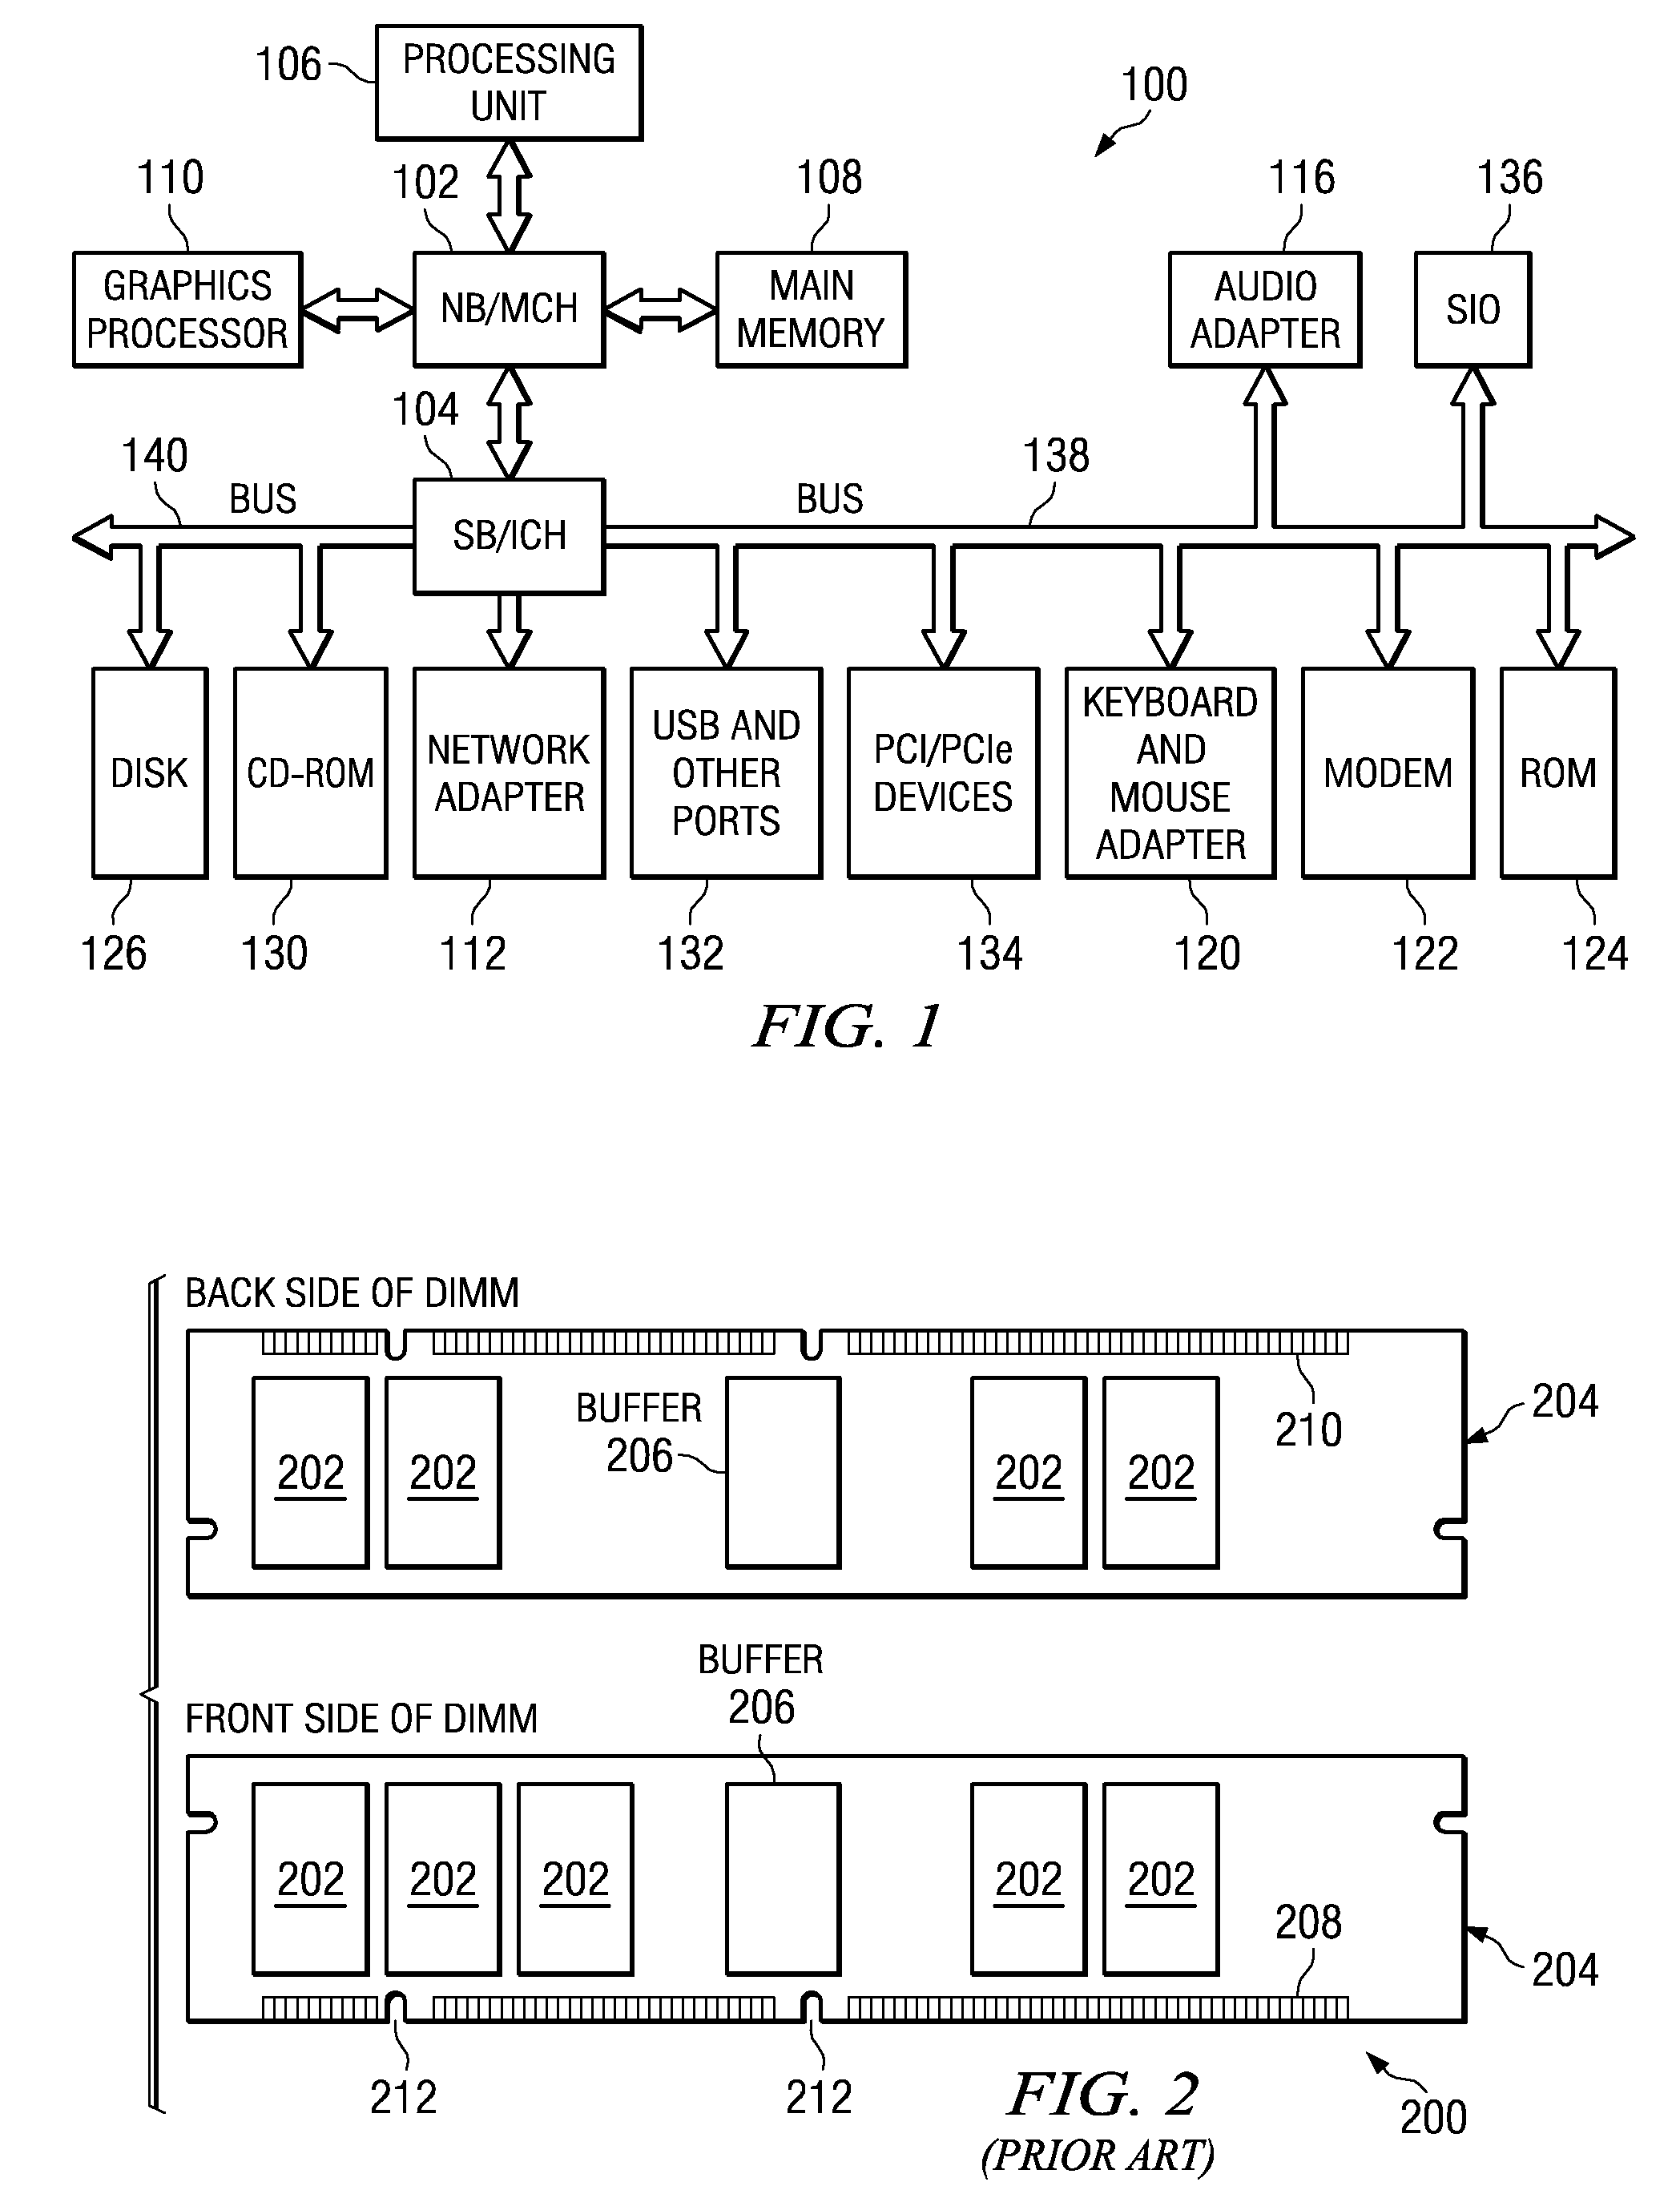 Buffered Memory Module Supporting Double the Memory Device Data Width in the Same Physical Space as a Conventional Memory Module